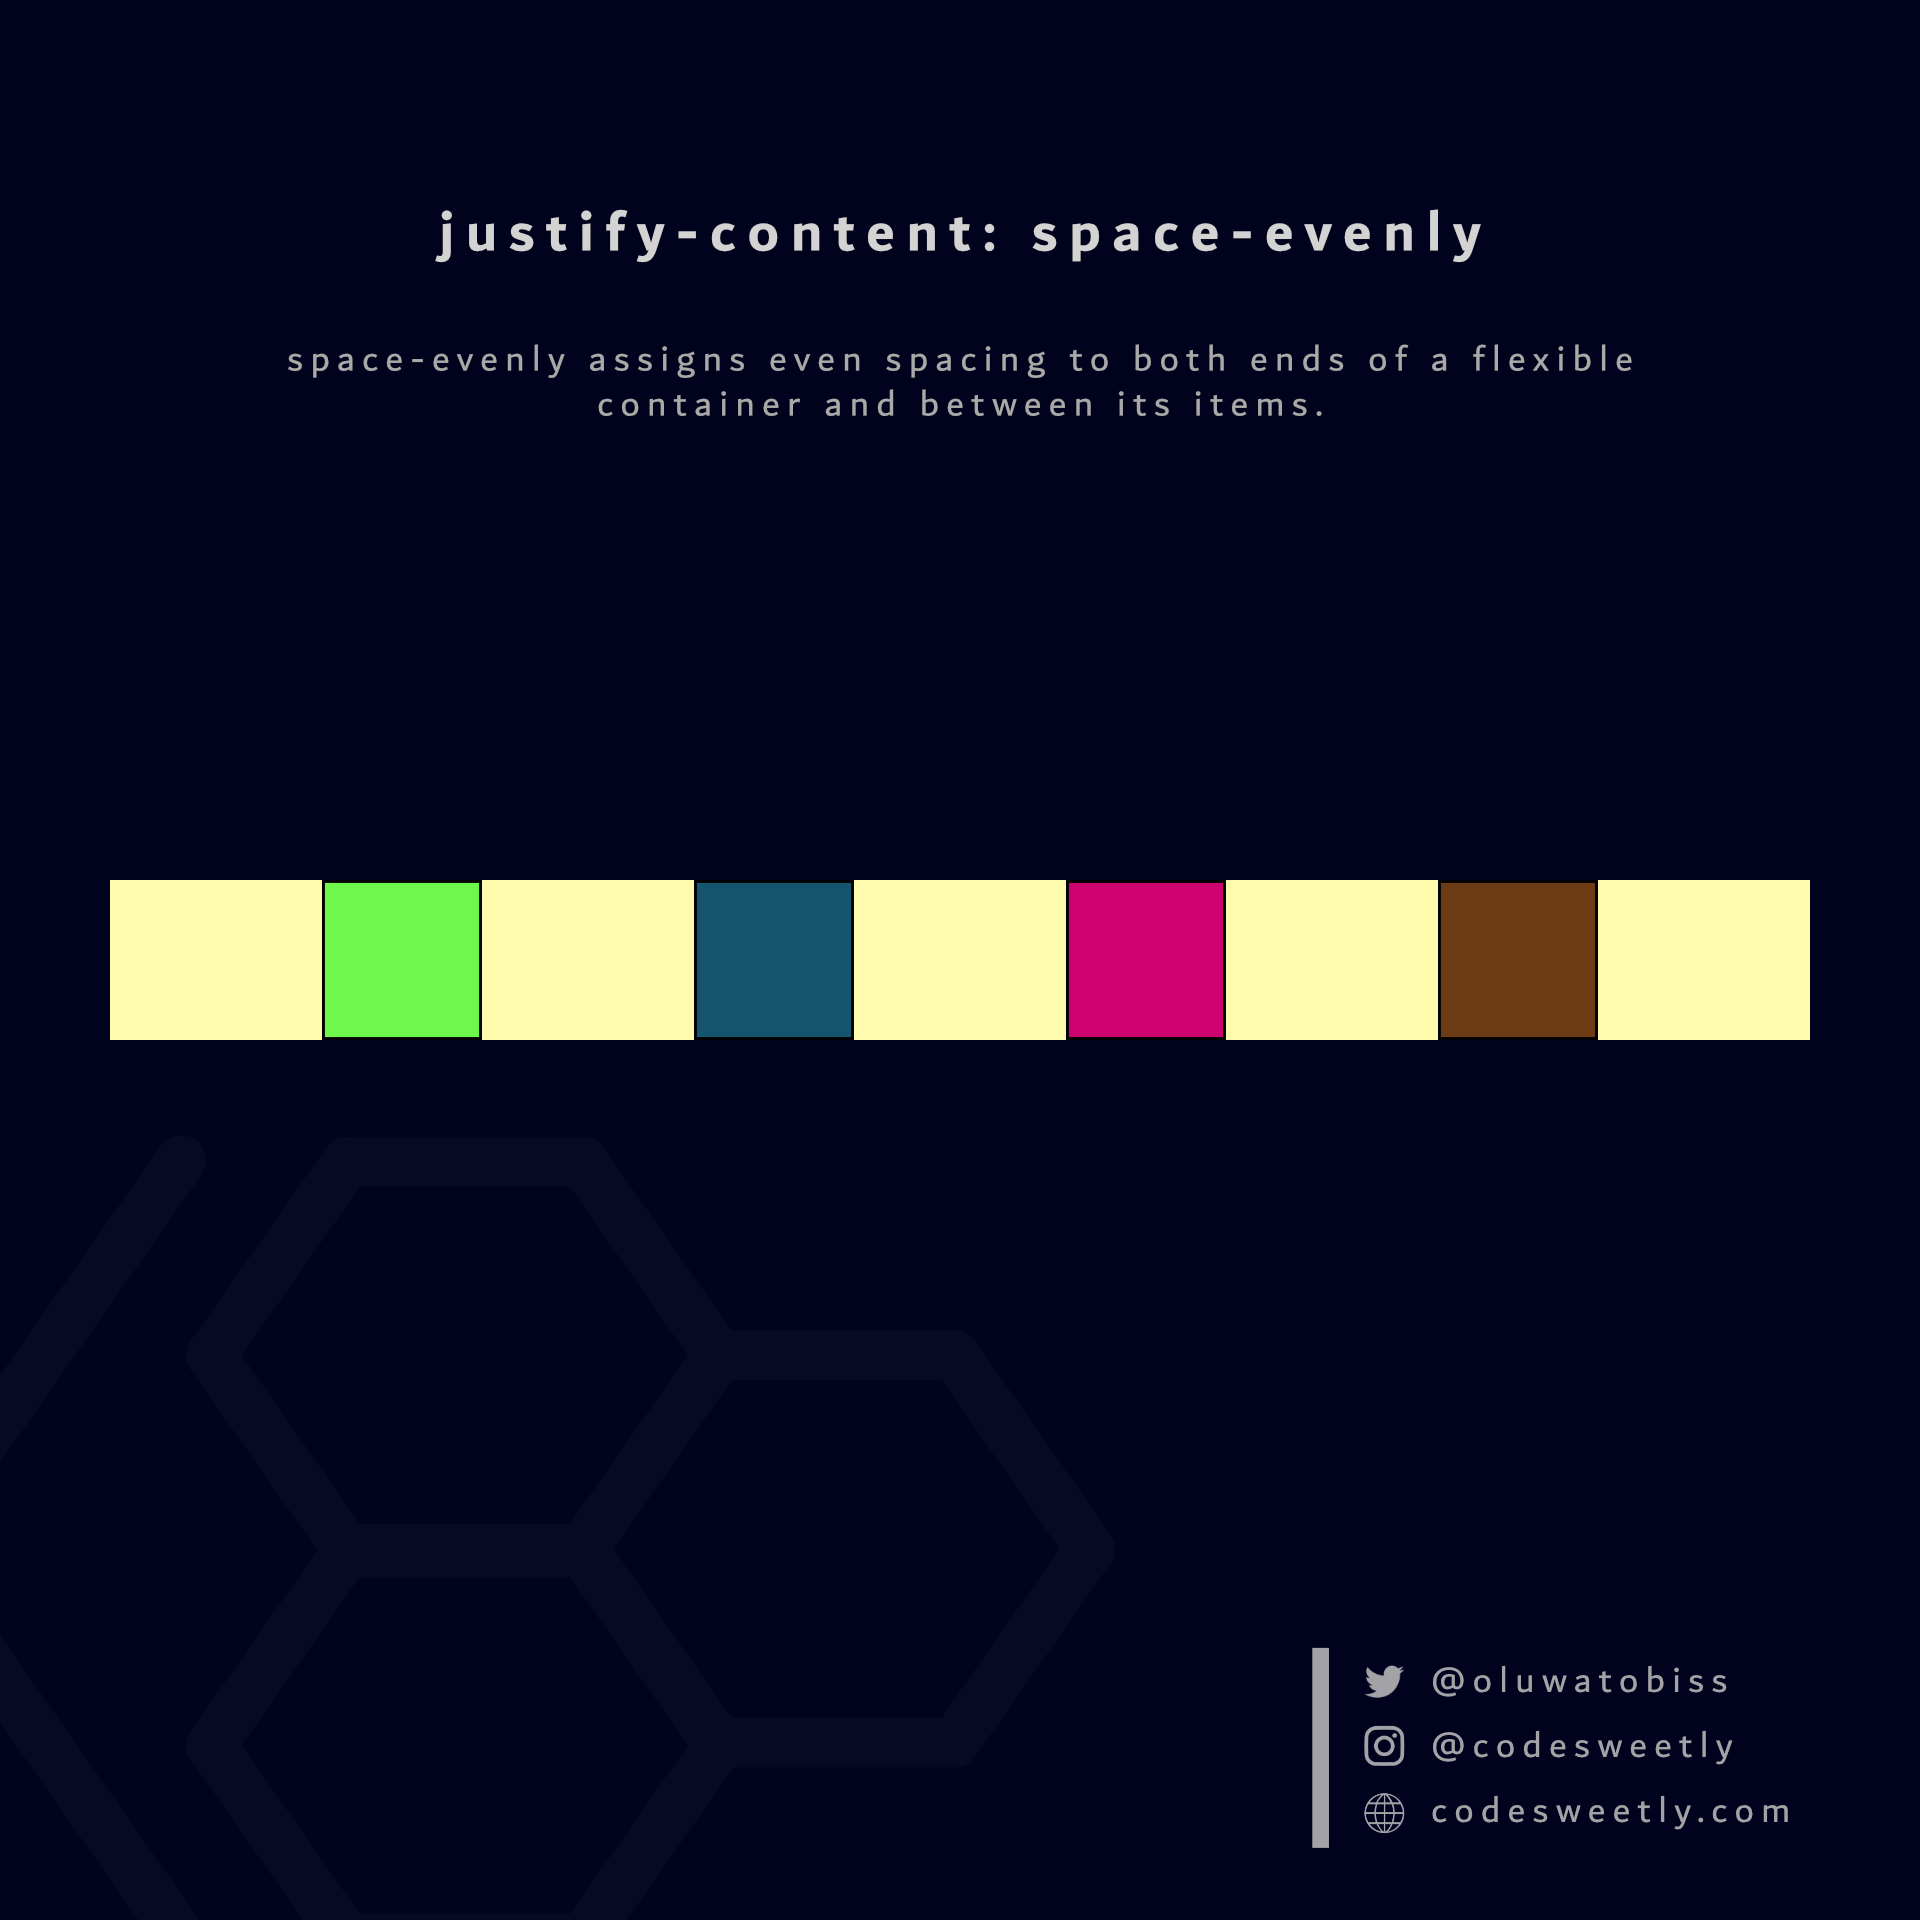 justify-content의 space-evenly 값에 대한 그림